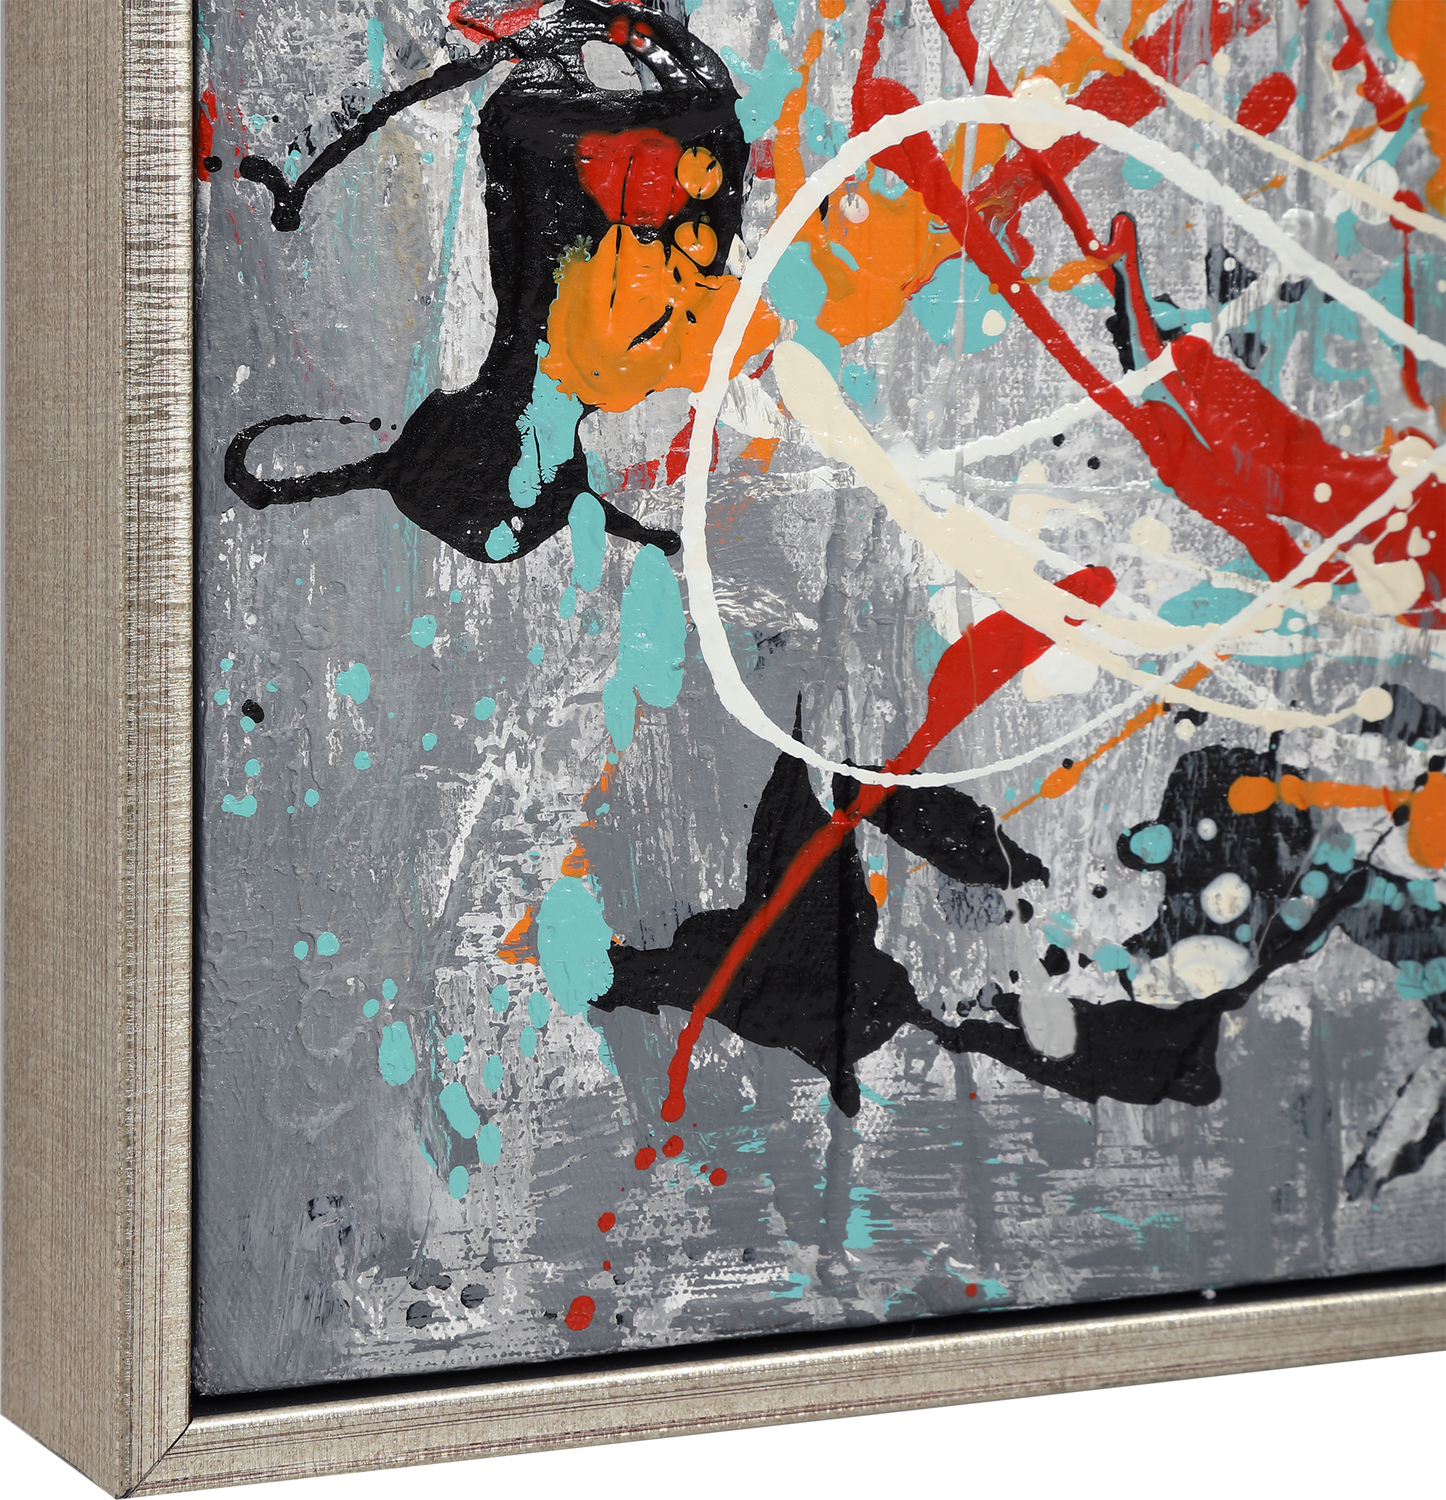 photo hanging ideas Uttermost Abstract Art Graphic Abstract With Dark Gray, White, Red, Aqua, Orange, Yellow, Black, Green, Splatter Style, Silver Leaf Gallery Frame, Hand Painting